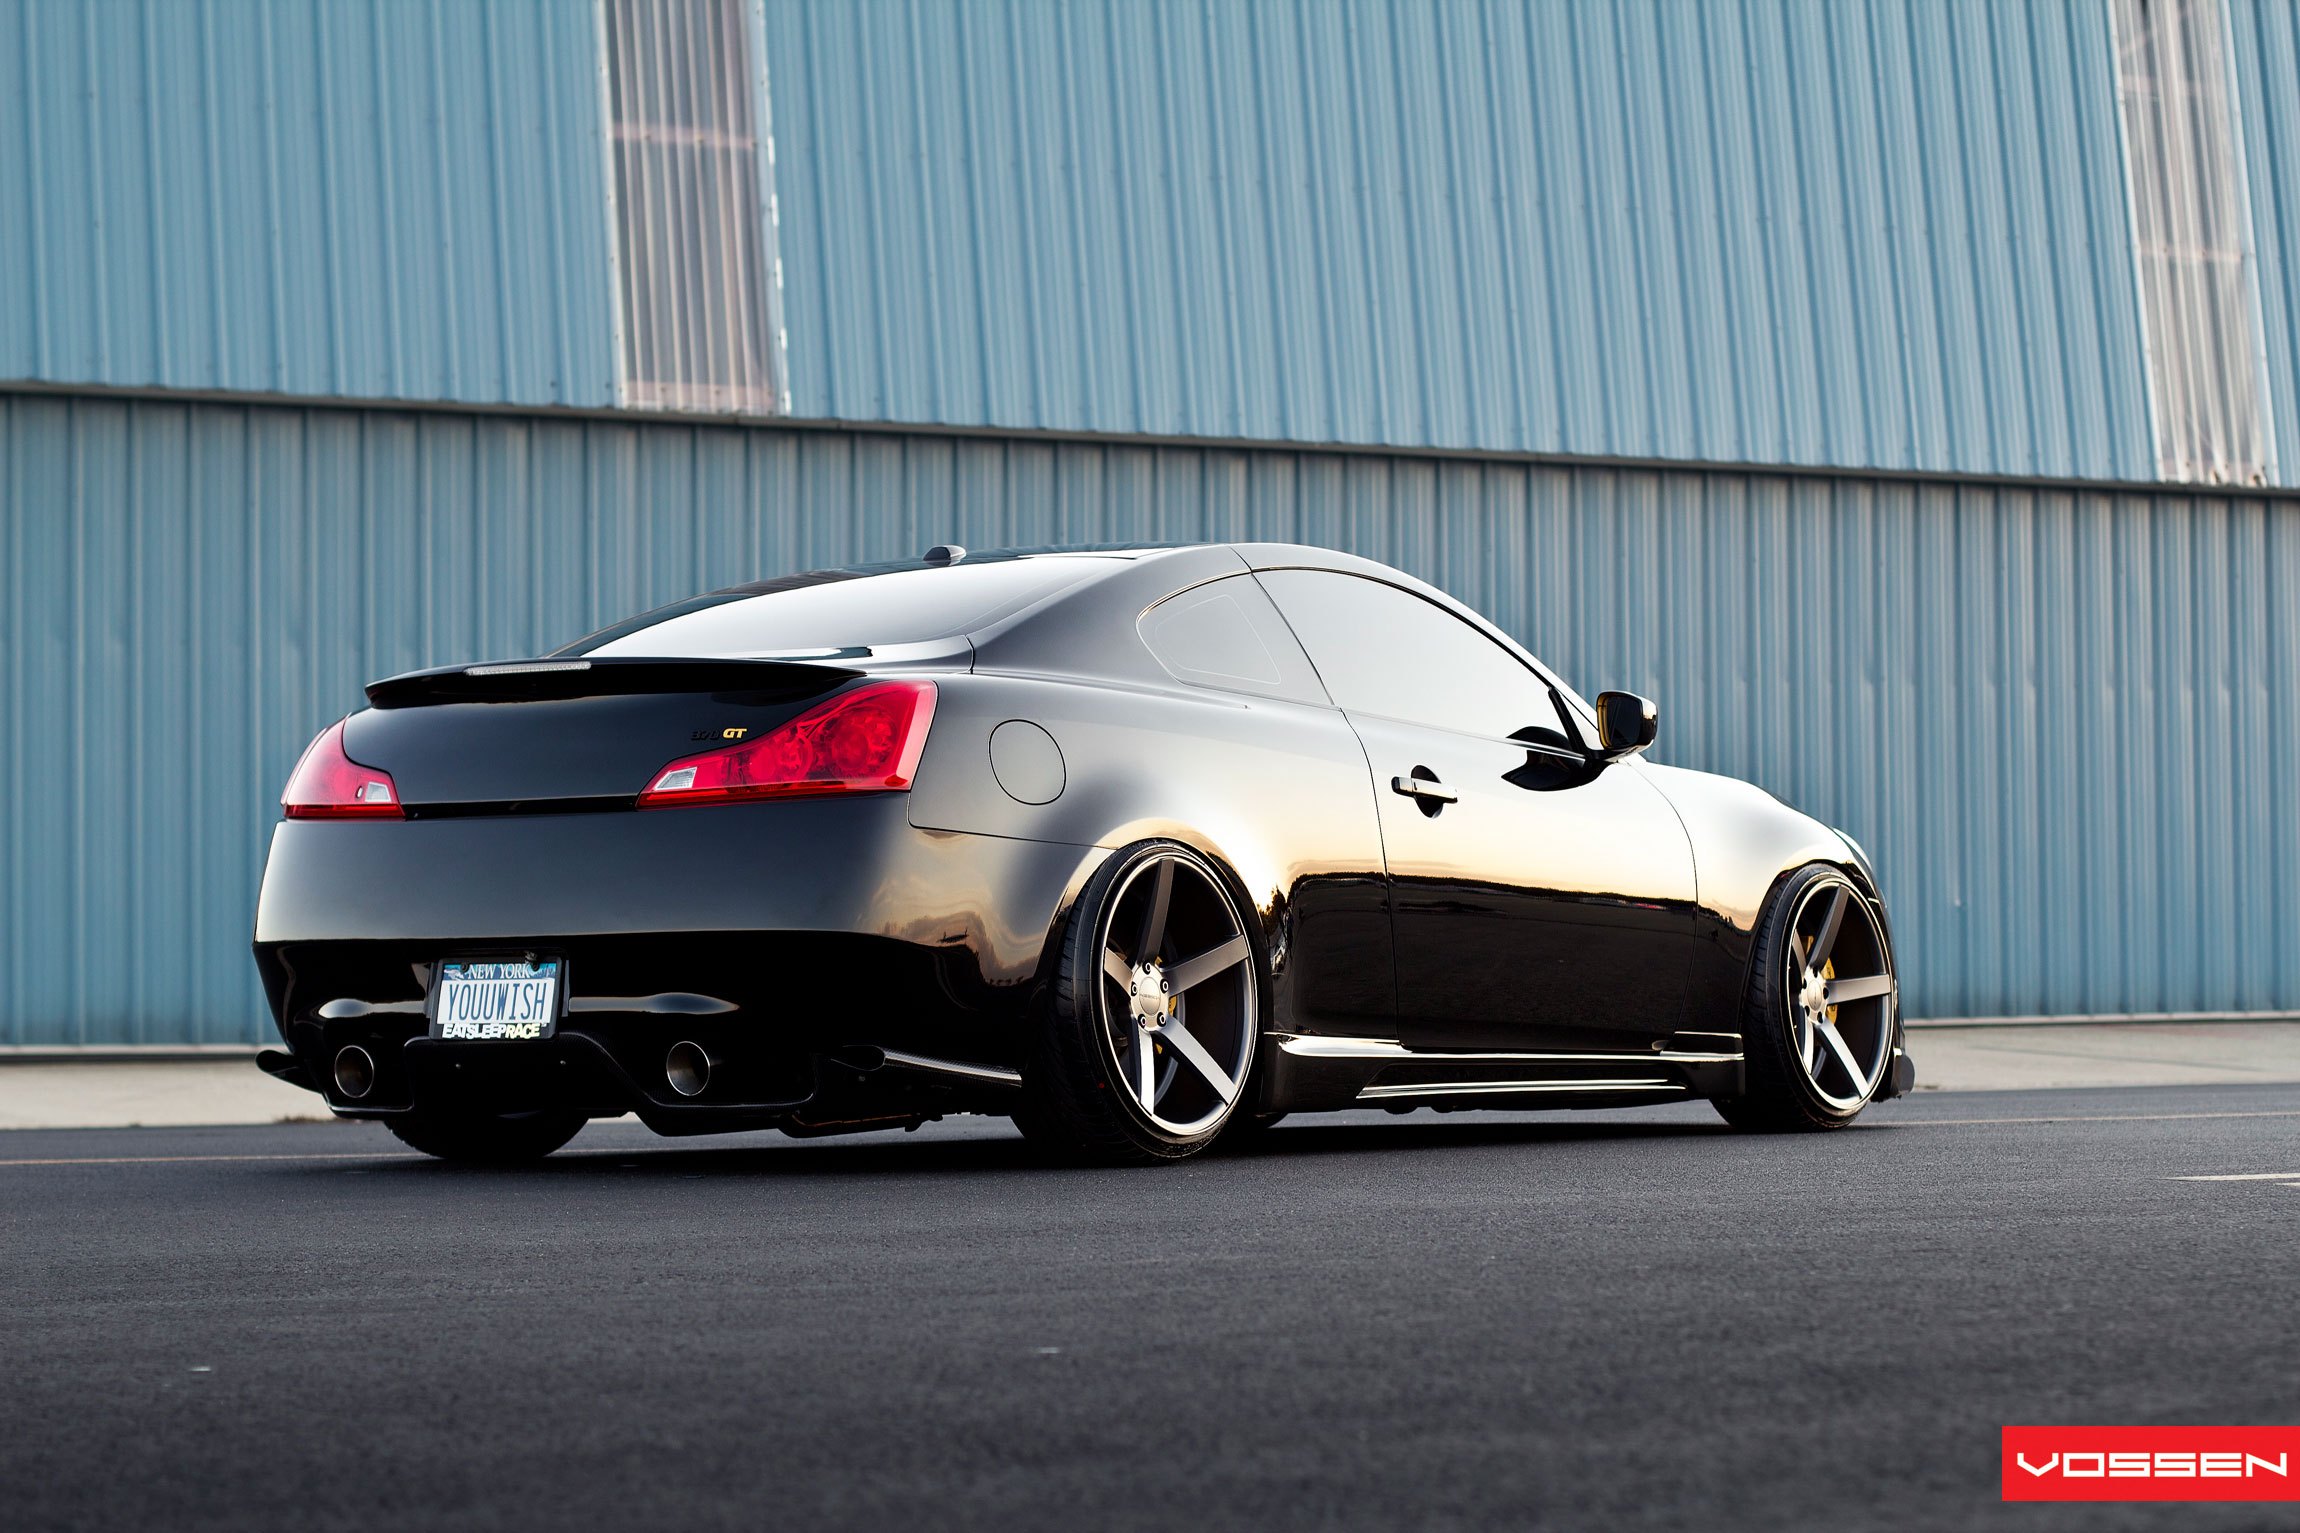 Black Infiniti G37 with Custom Rear Diffuser - Photo by Vossen